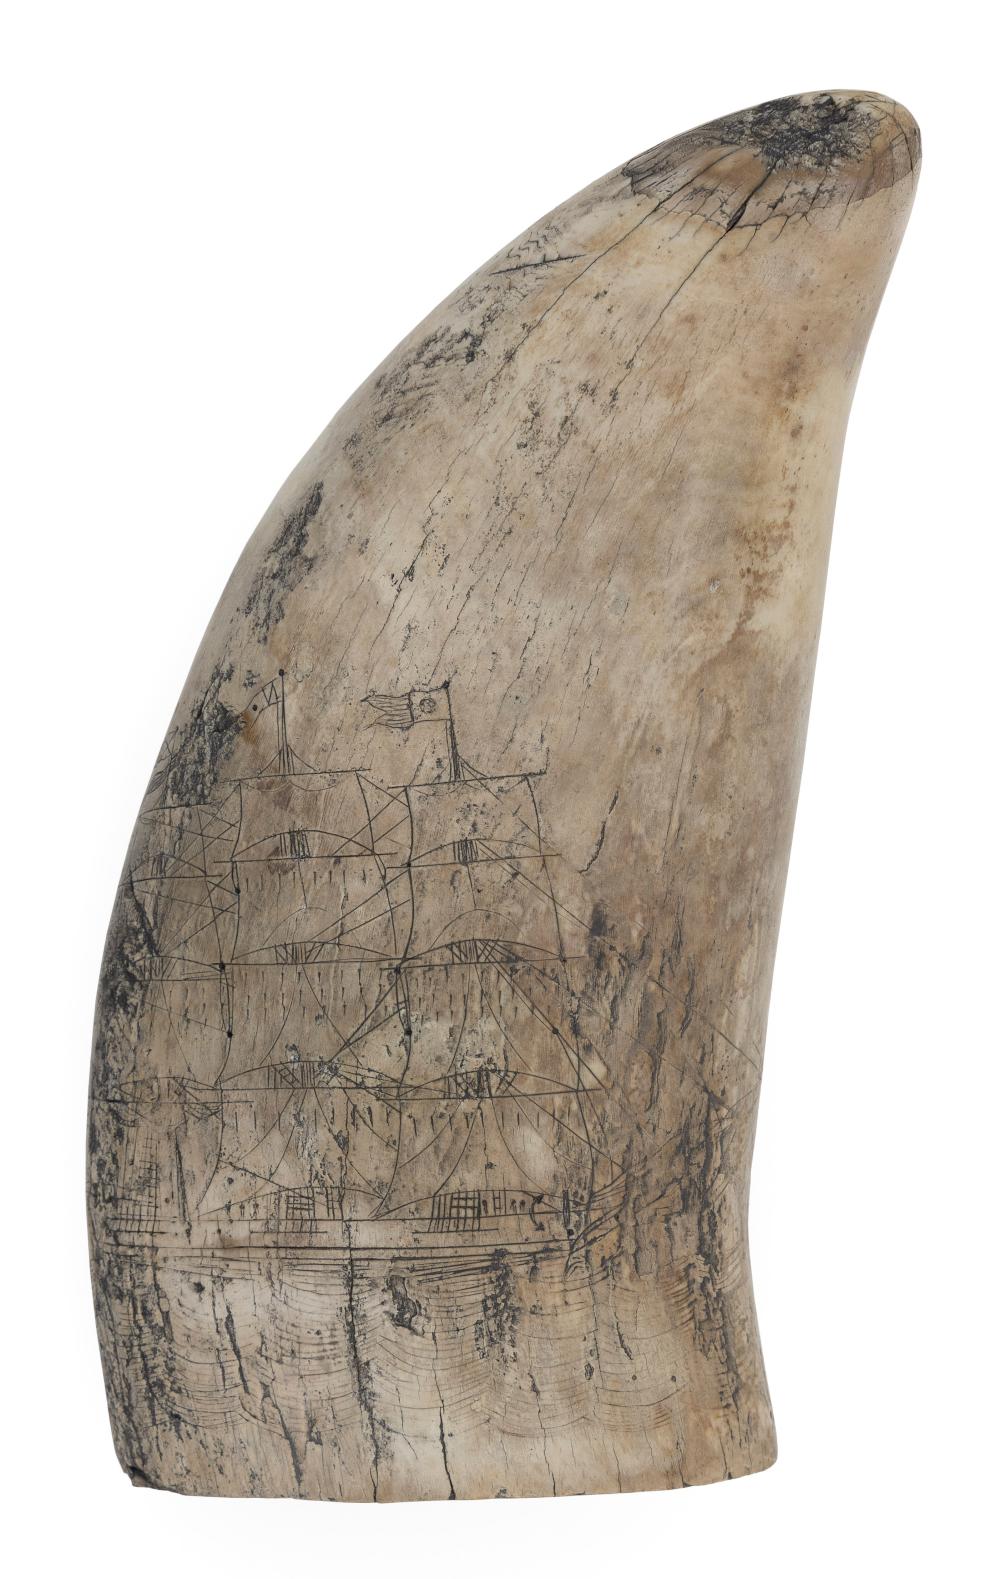 SCRIMSHAW WHALE S TOOTH WITH SHIP 350150